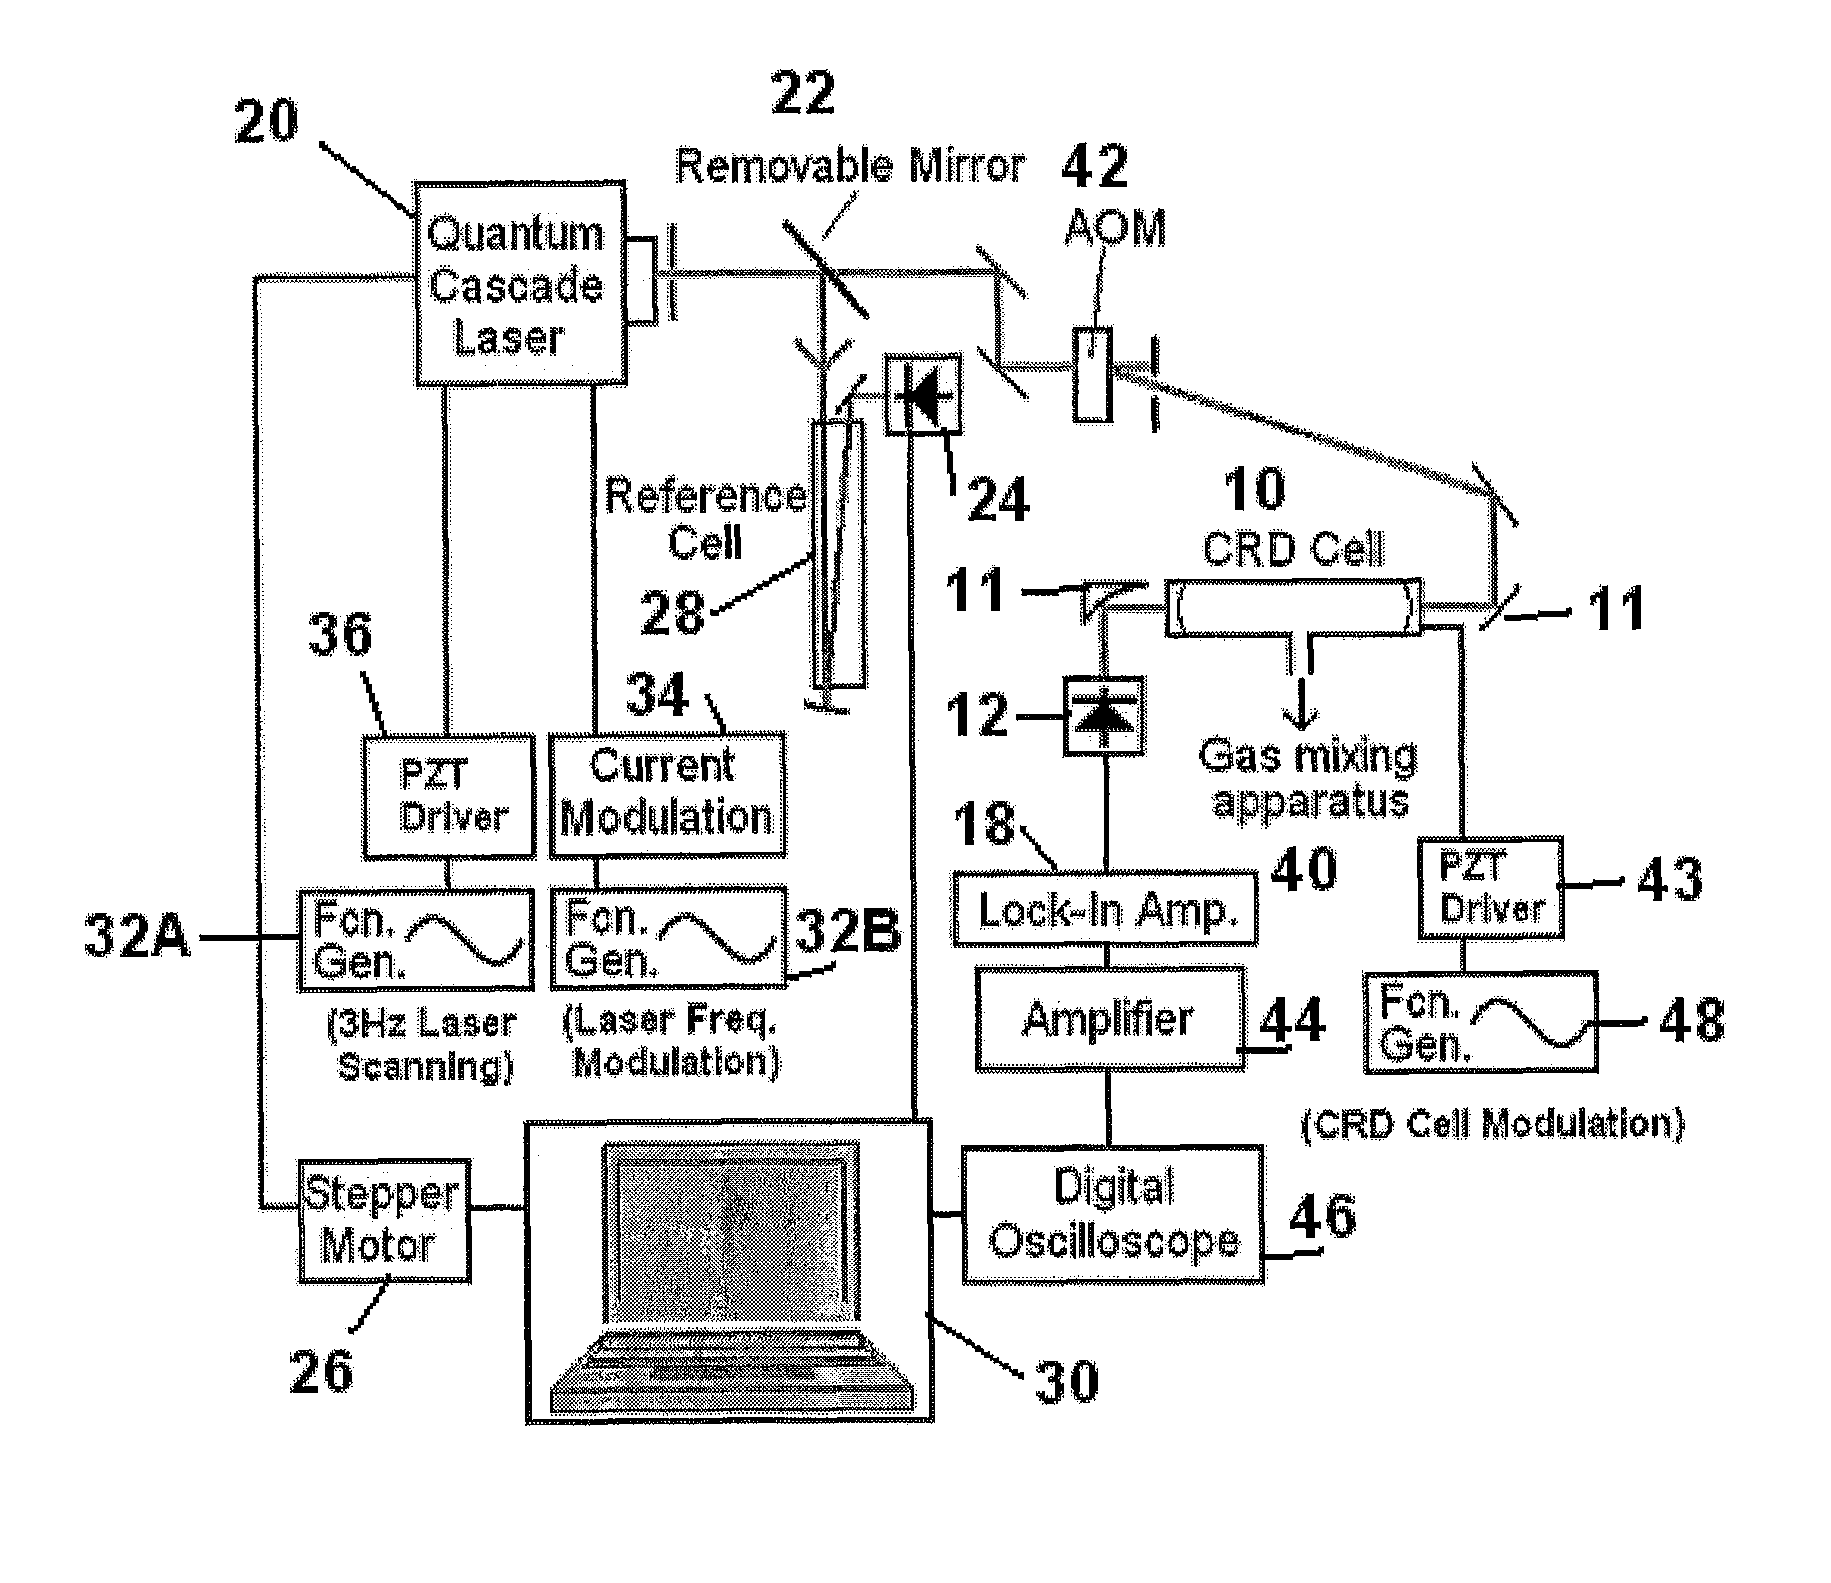 Method and apparatus for trace gas detection using off-axis cavity and multiple line integrated spectroscopy